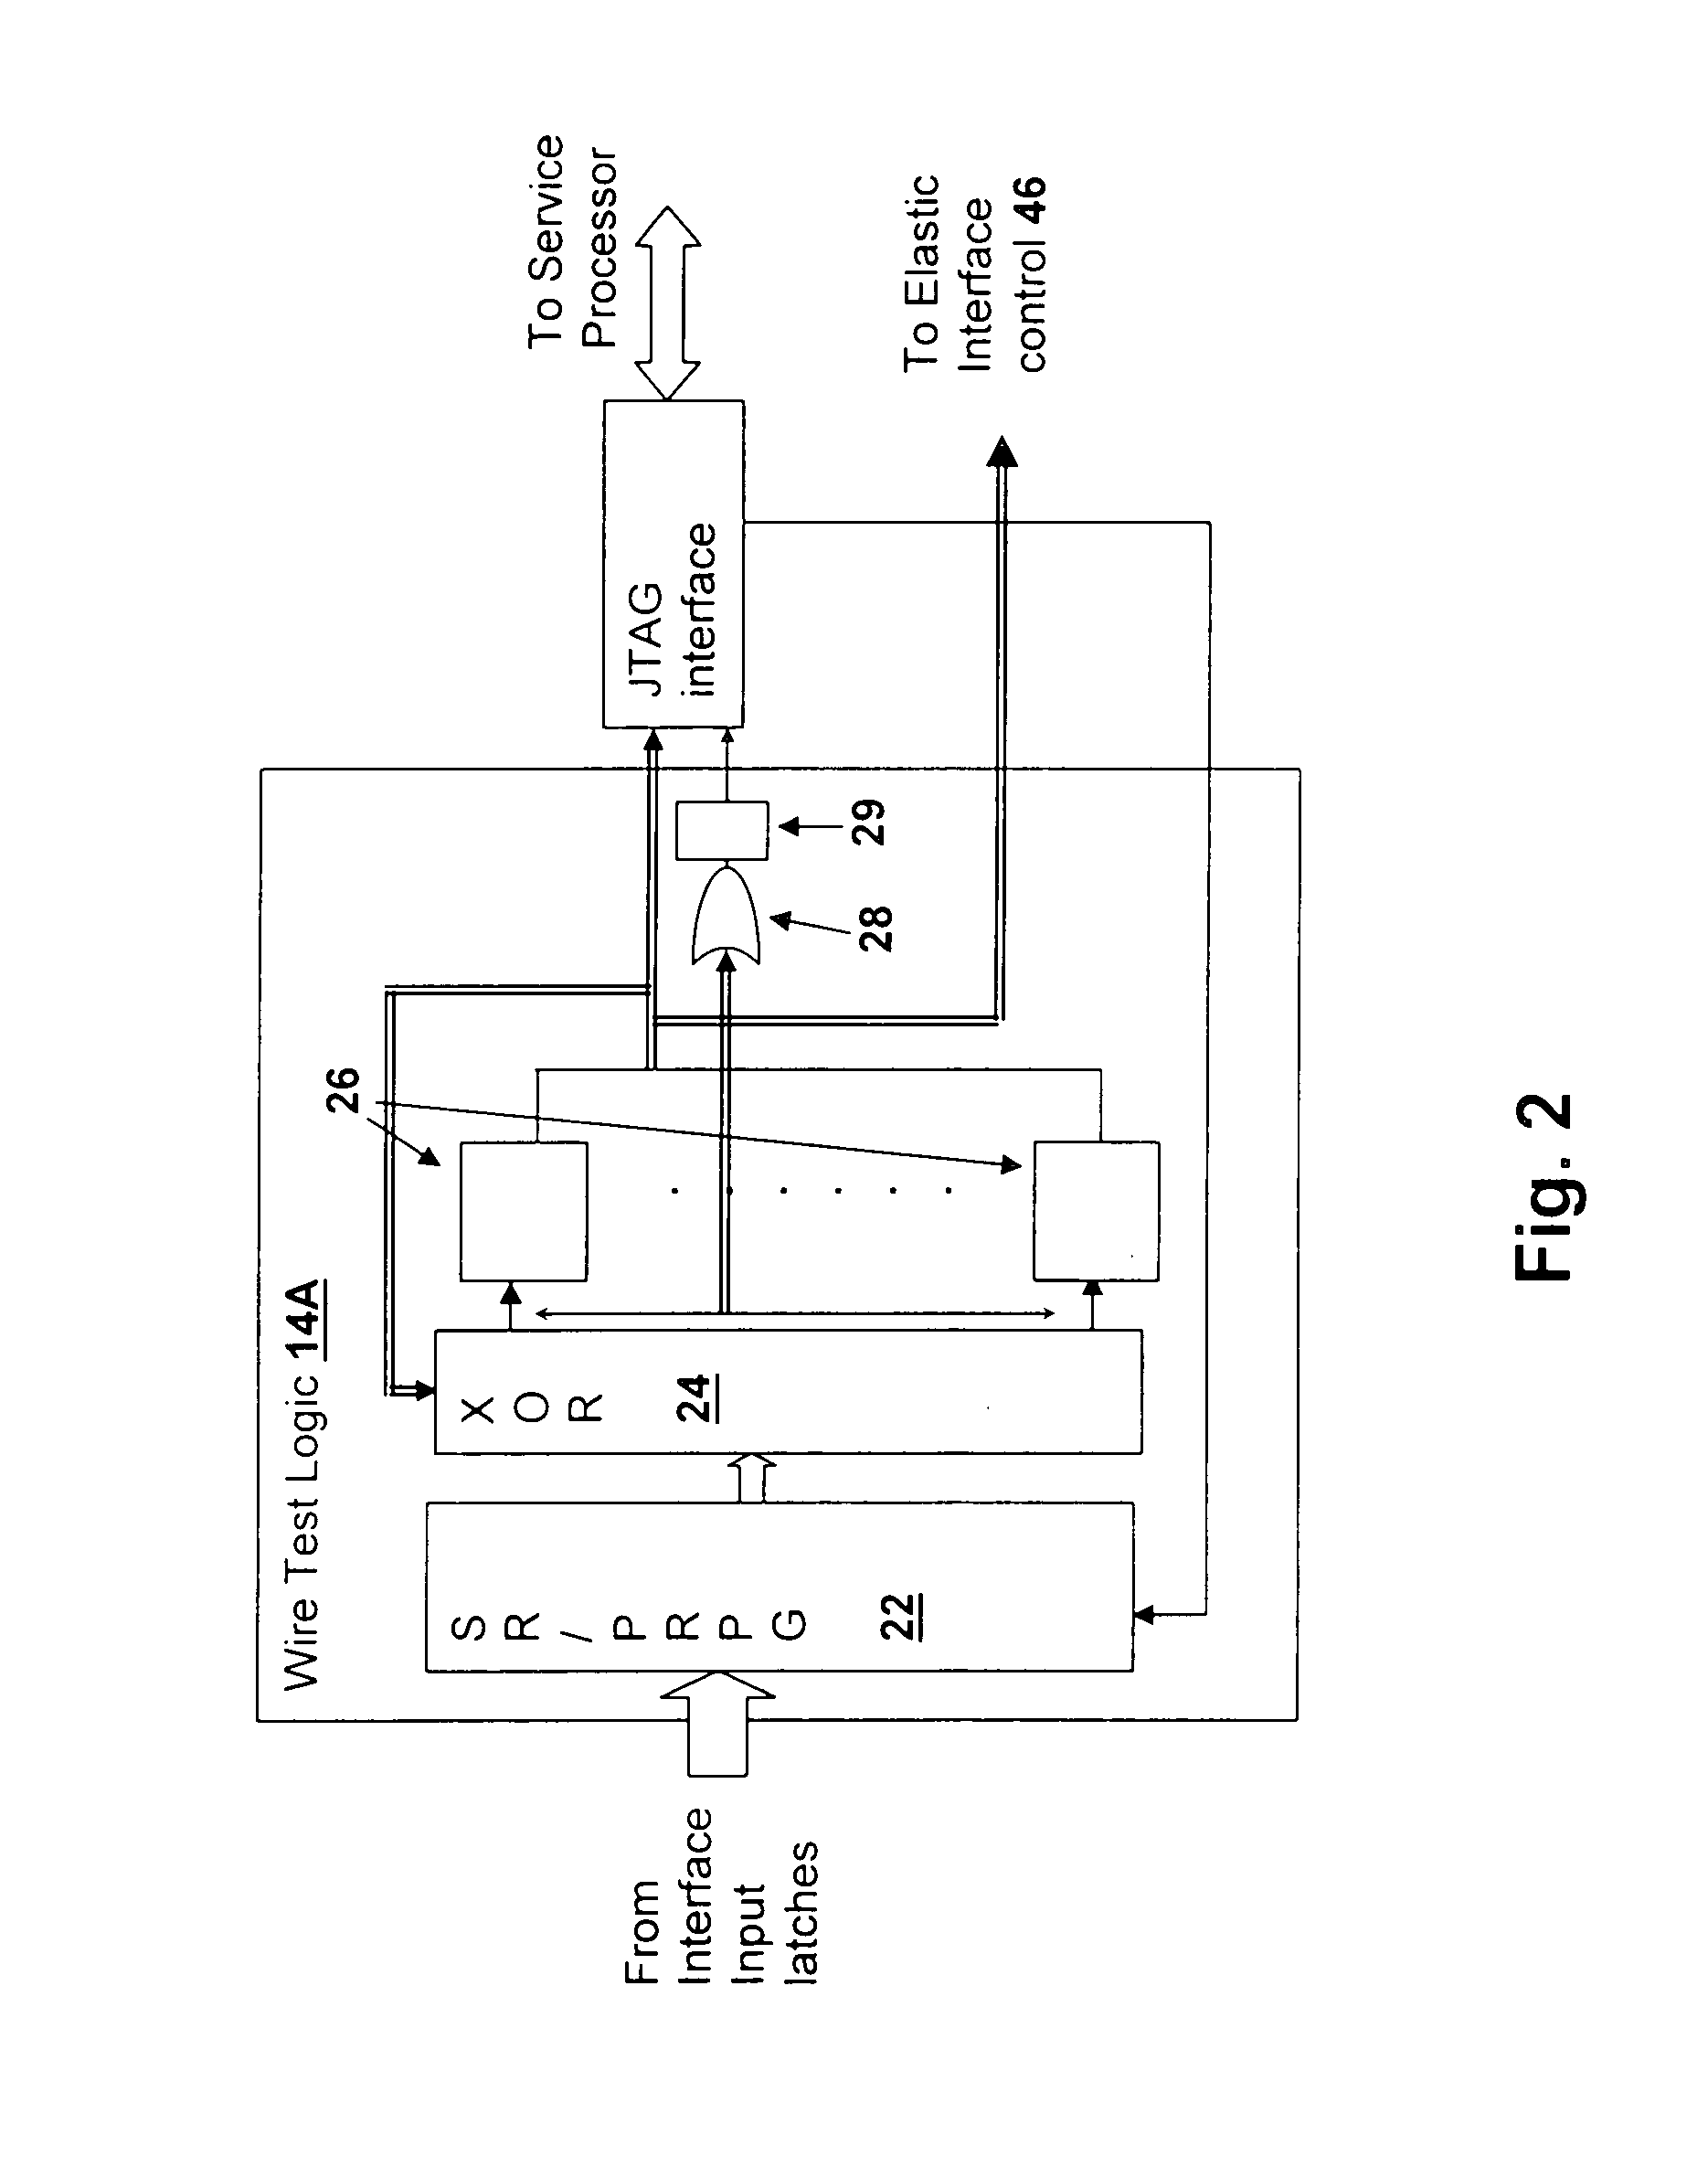 Method and apparatus for interface failure survivability using error correction